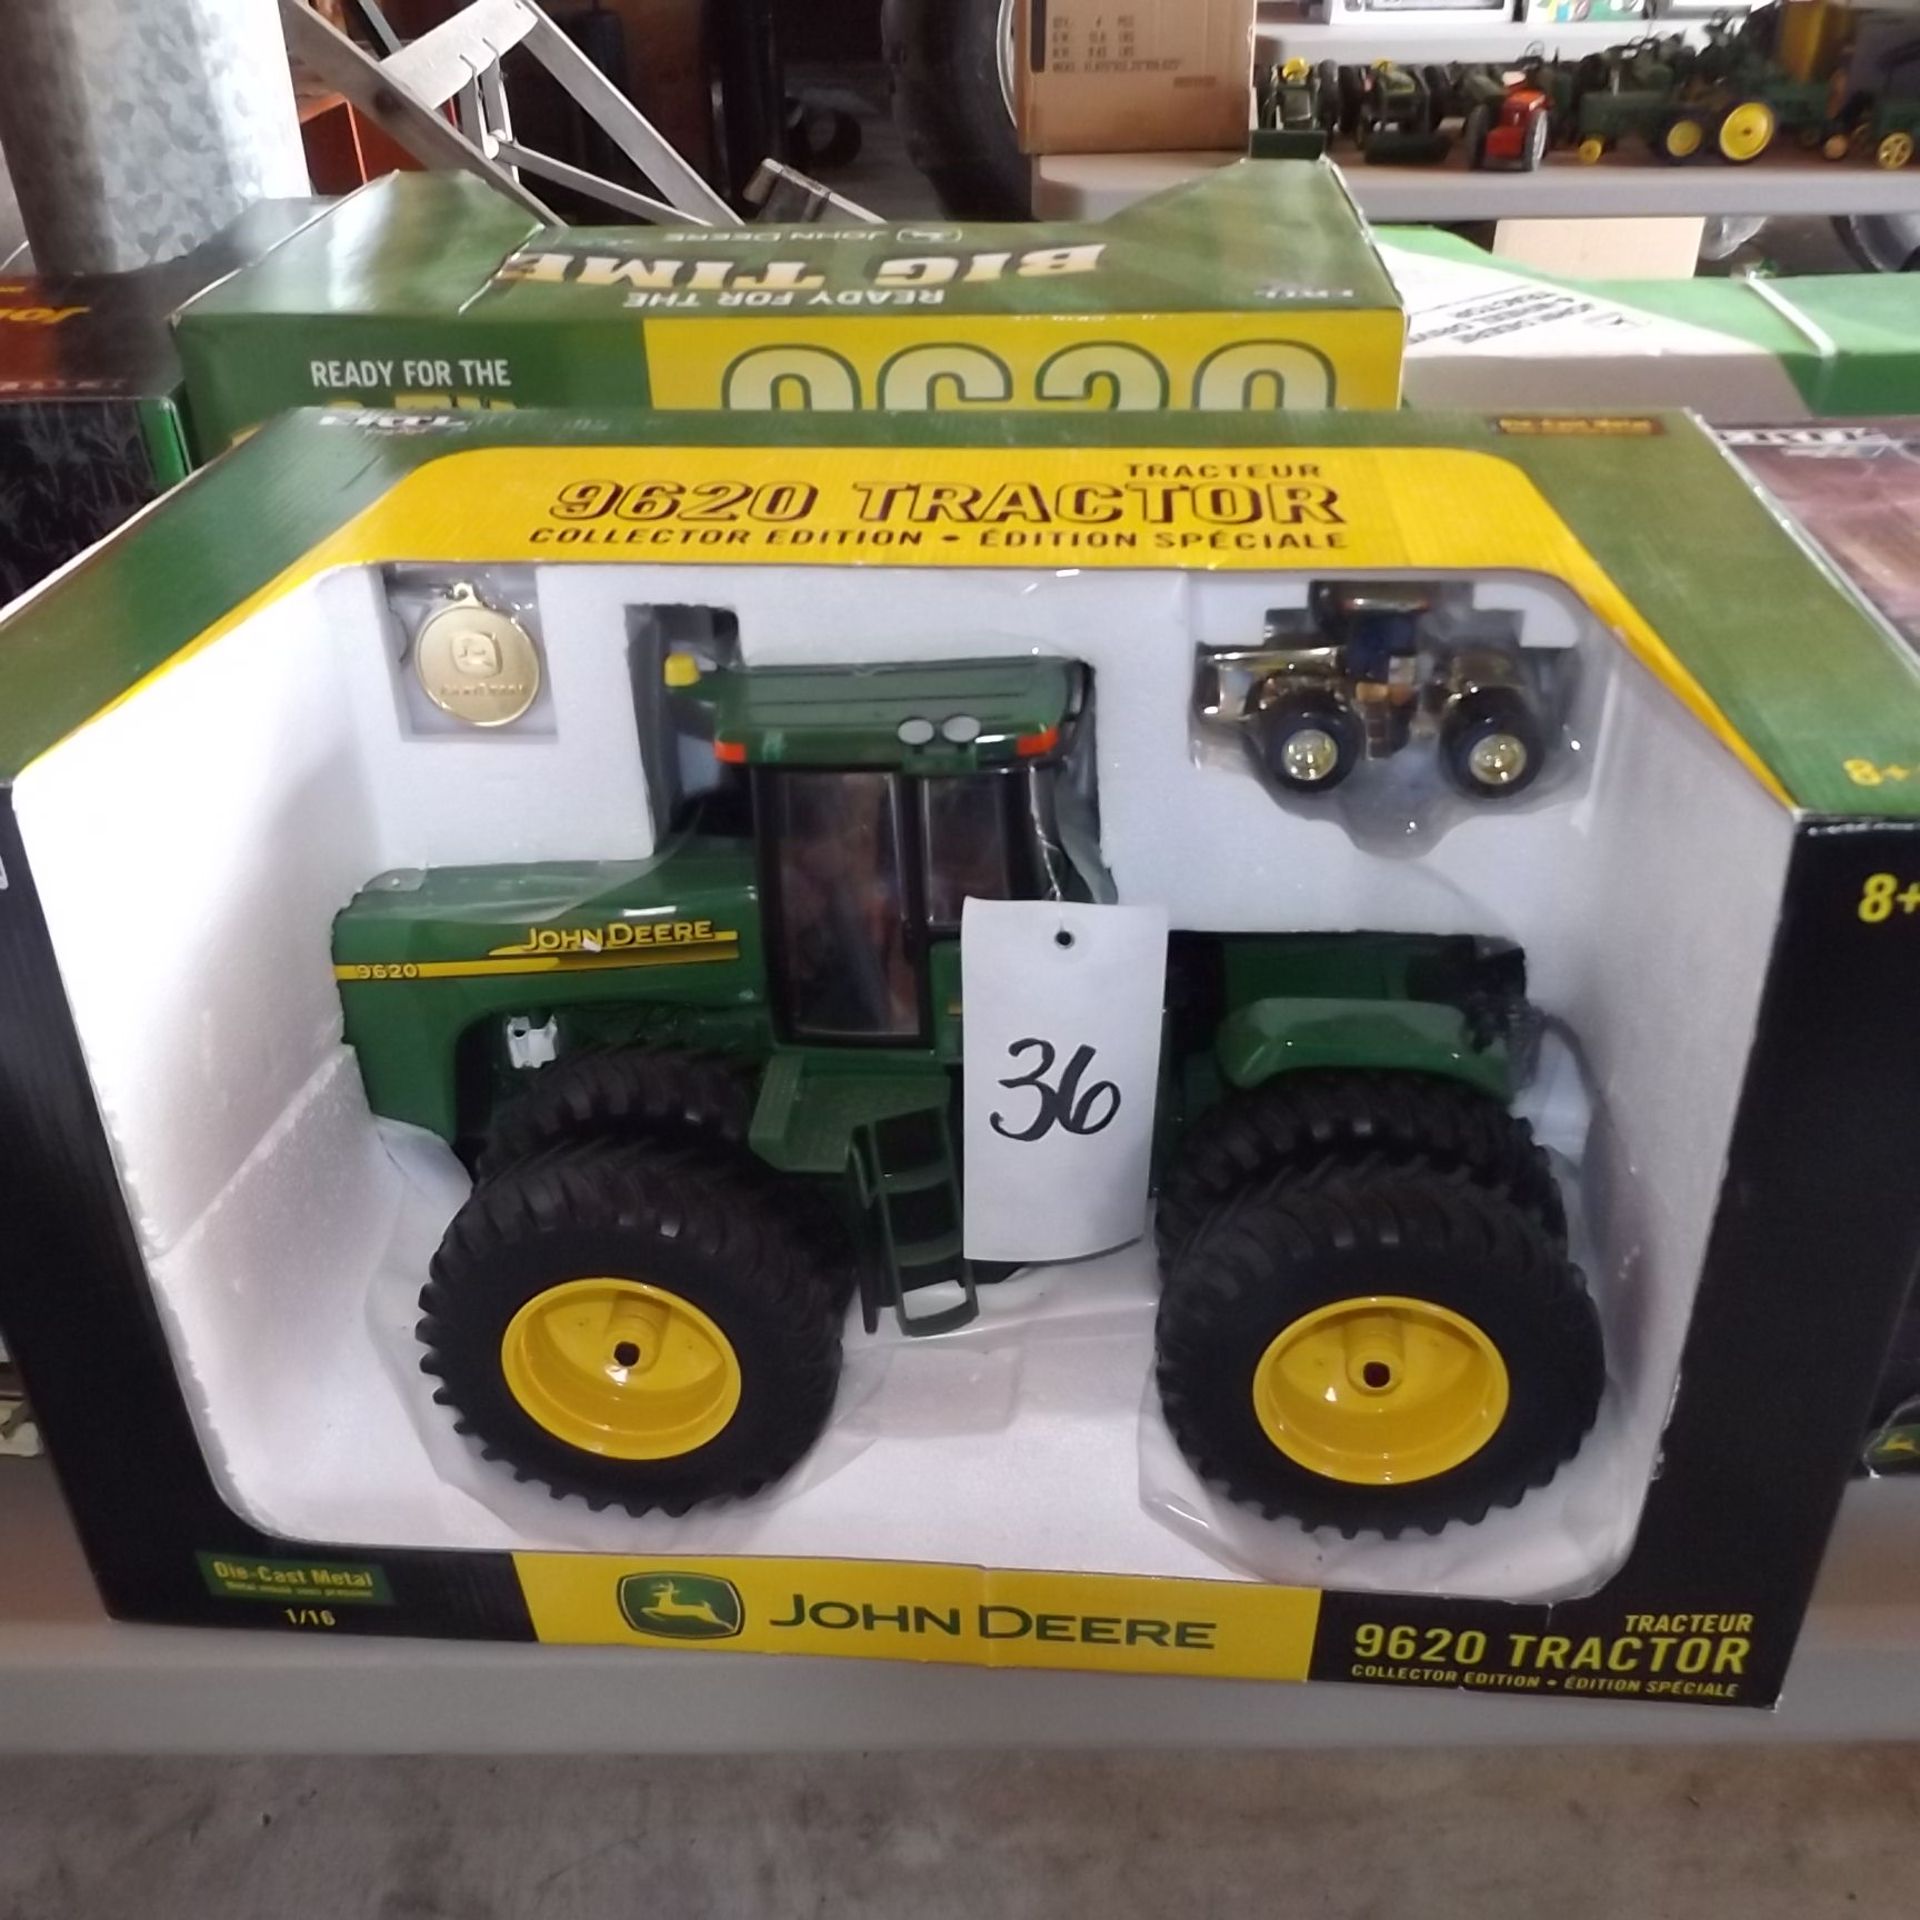 JD 9620 Toy Tractor Gold Medalion Collector Edition, Duals, 1/16